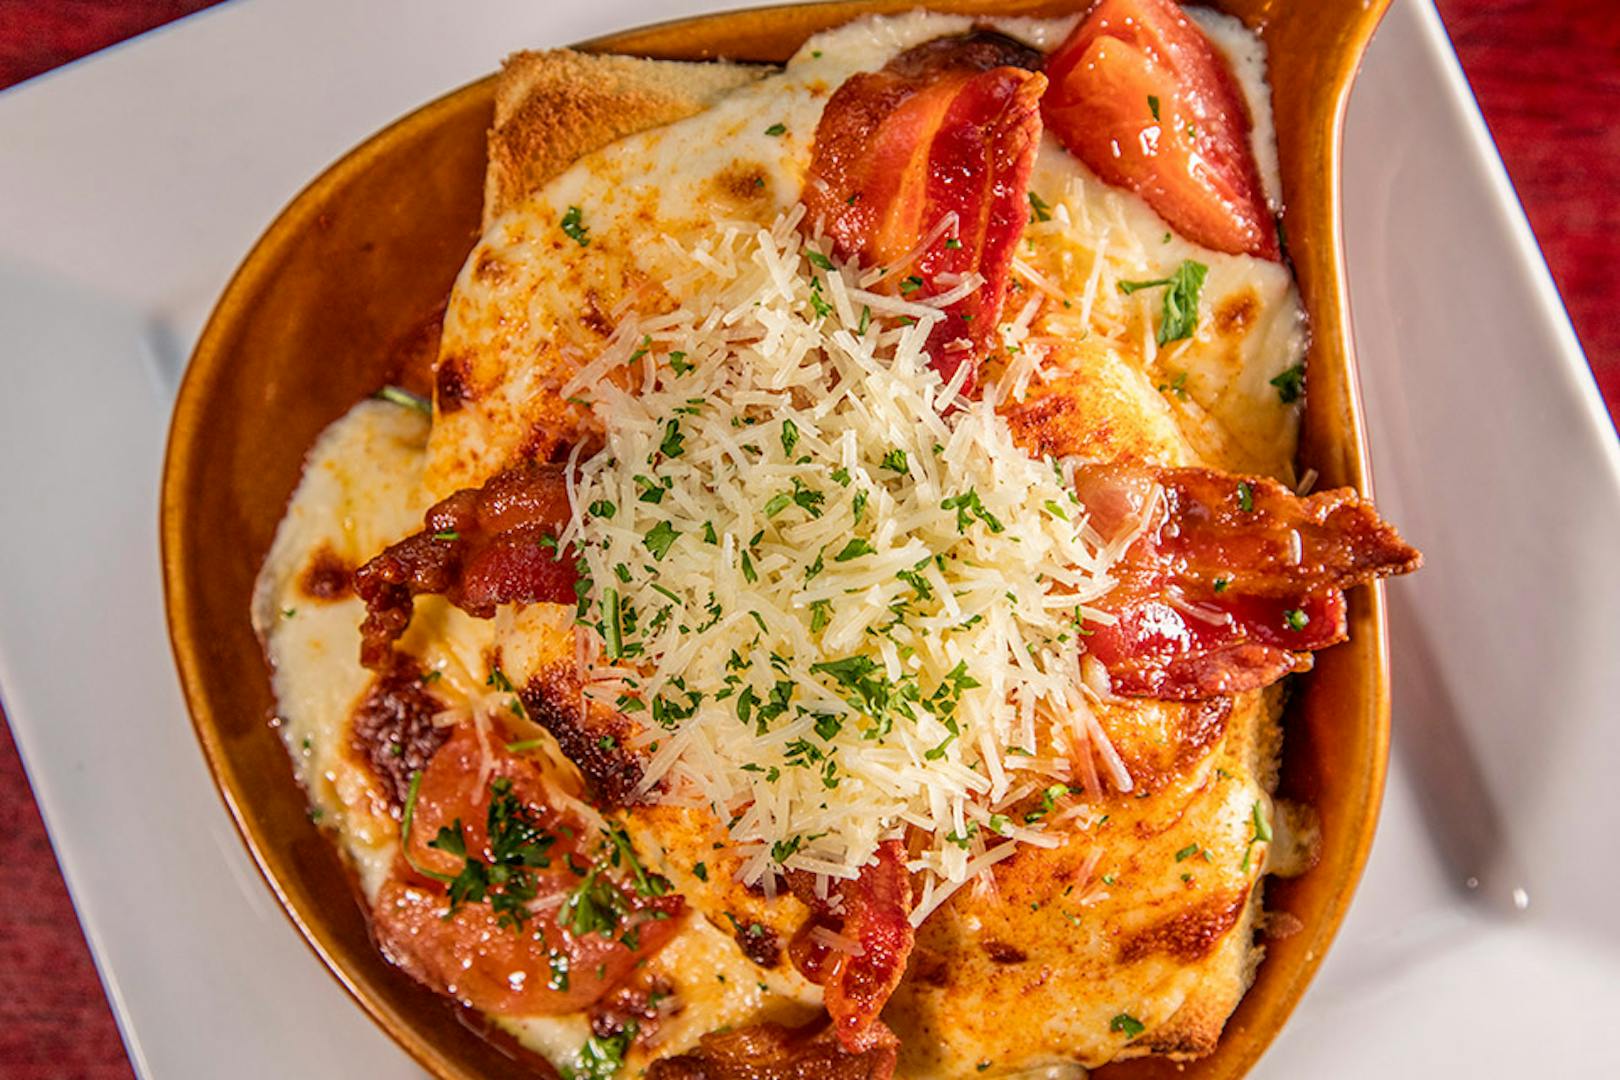 The Hot Brown at The Brown Hotel in Louisville, Kentucky (photo by Chris Witzke)